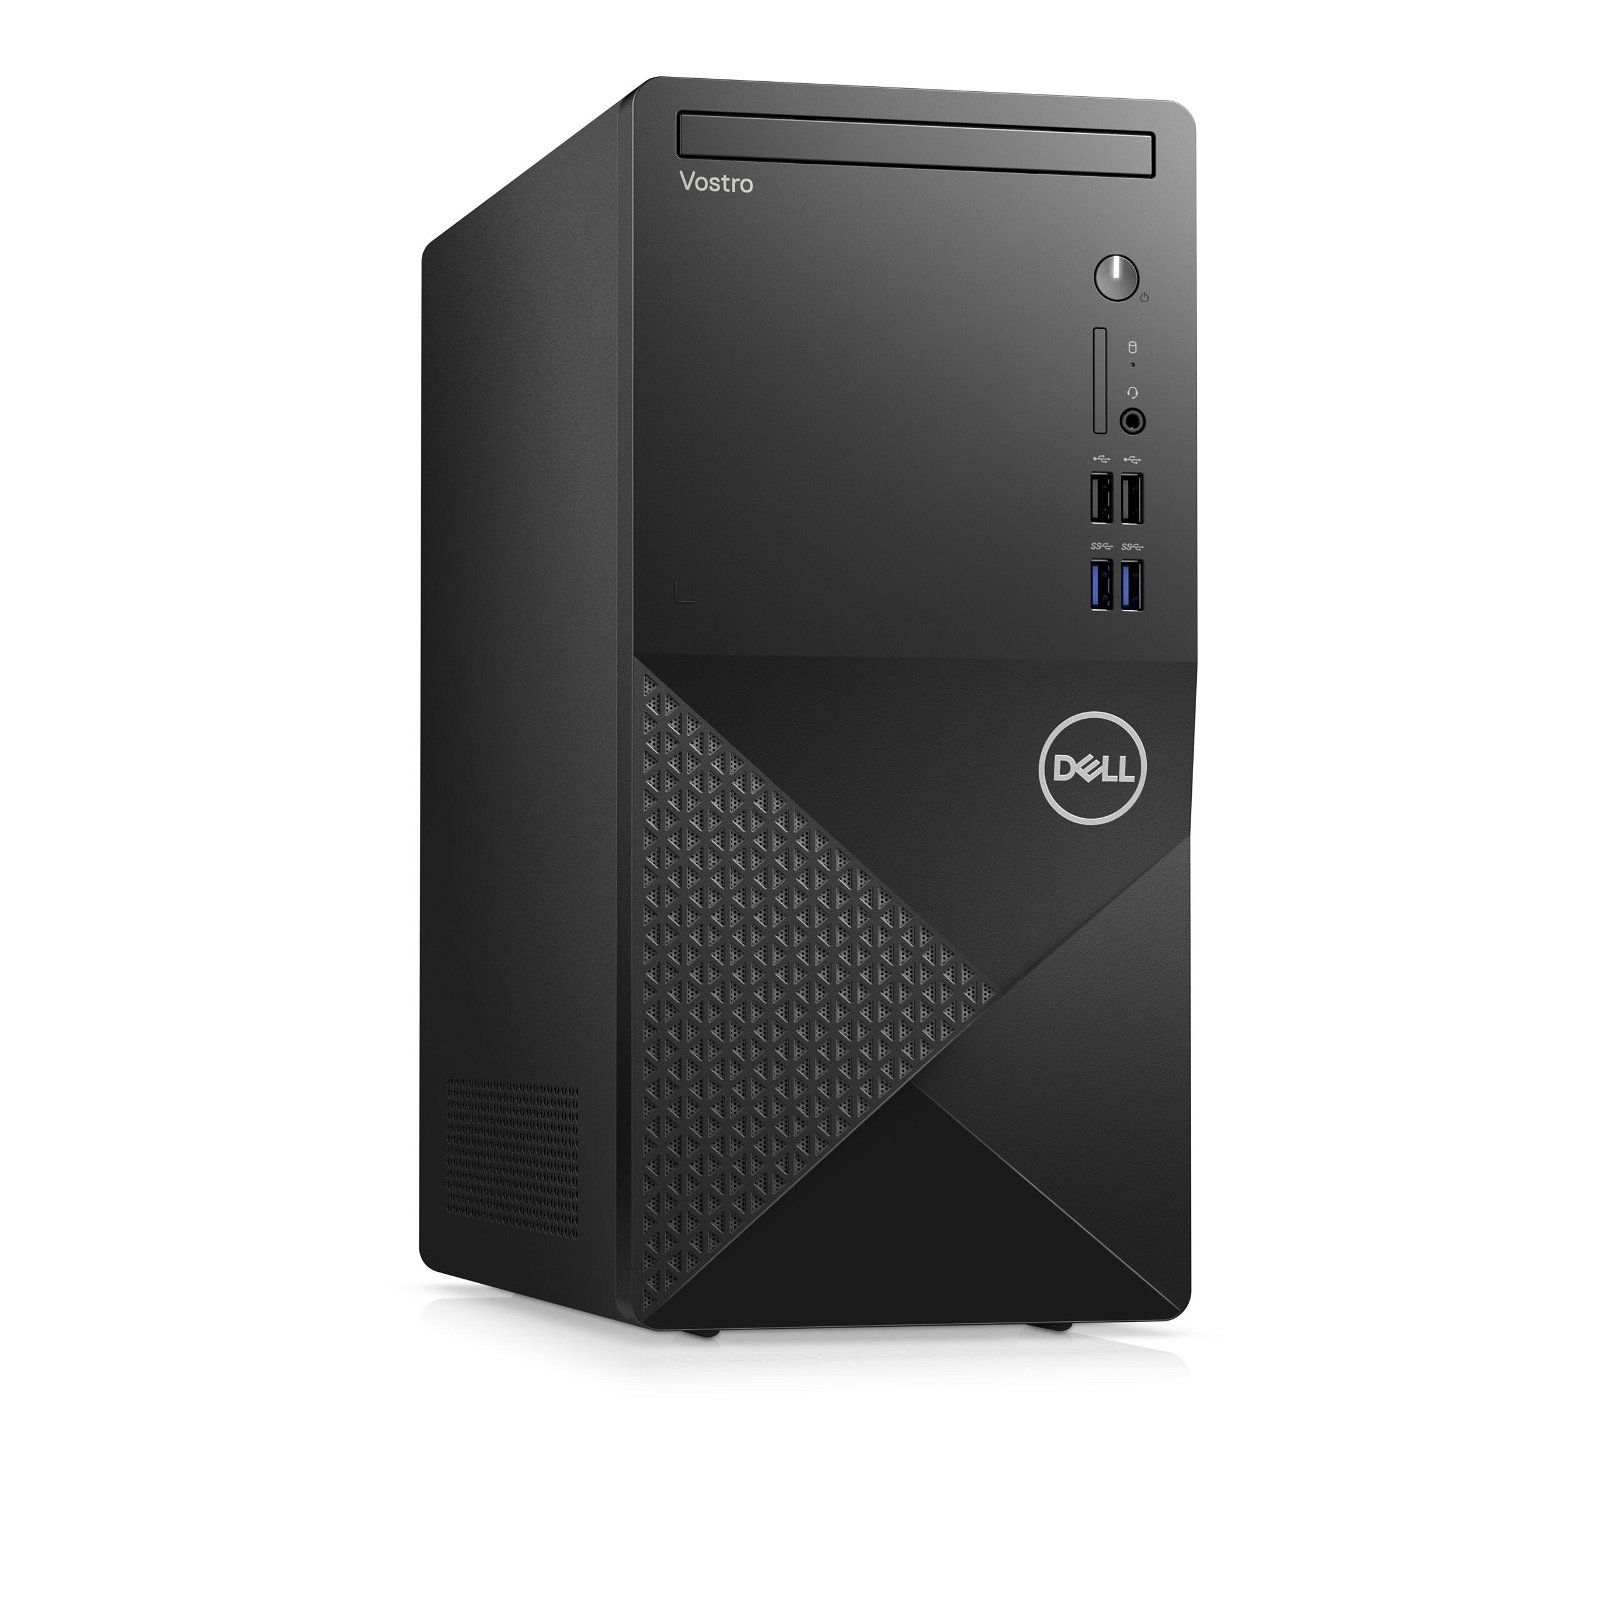 Desktop Vostro 3020 MT, 180W PSU Black Chassis (Silver Mesh) with TPM, 13th Gen Intel(R) Core(TM) i5-13400 processor (10-Core, 20MB Cache, 2.5GHz to 4.6GHz), Intel(R) UHD Graphics 730 with shared graphics memory , 8GB, 8Gx1, DDR4, 3200MHz, 256GB M.2 PCIe NVMe Solid State Drive, No Optical Drive_2